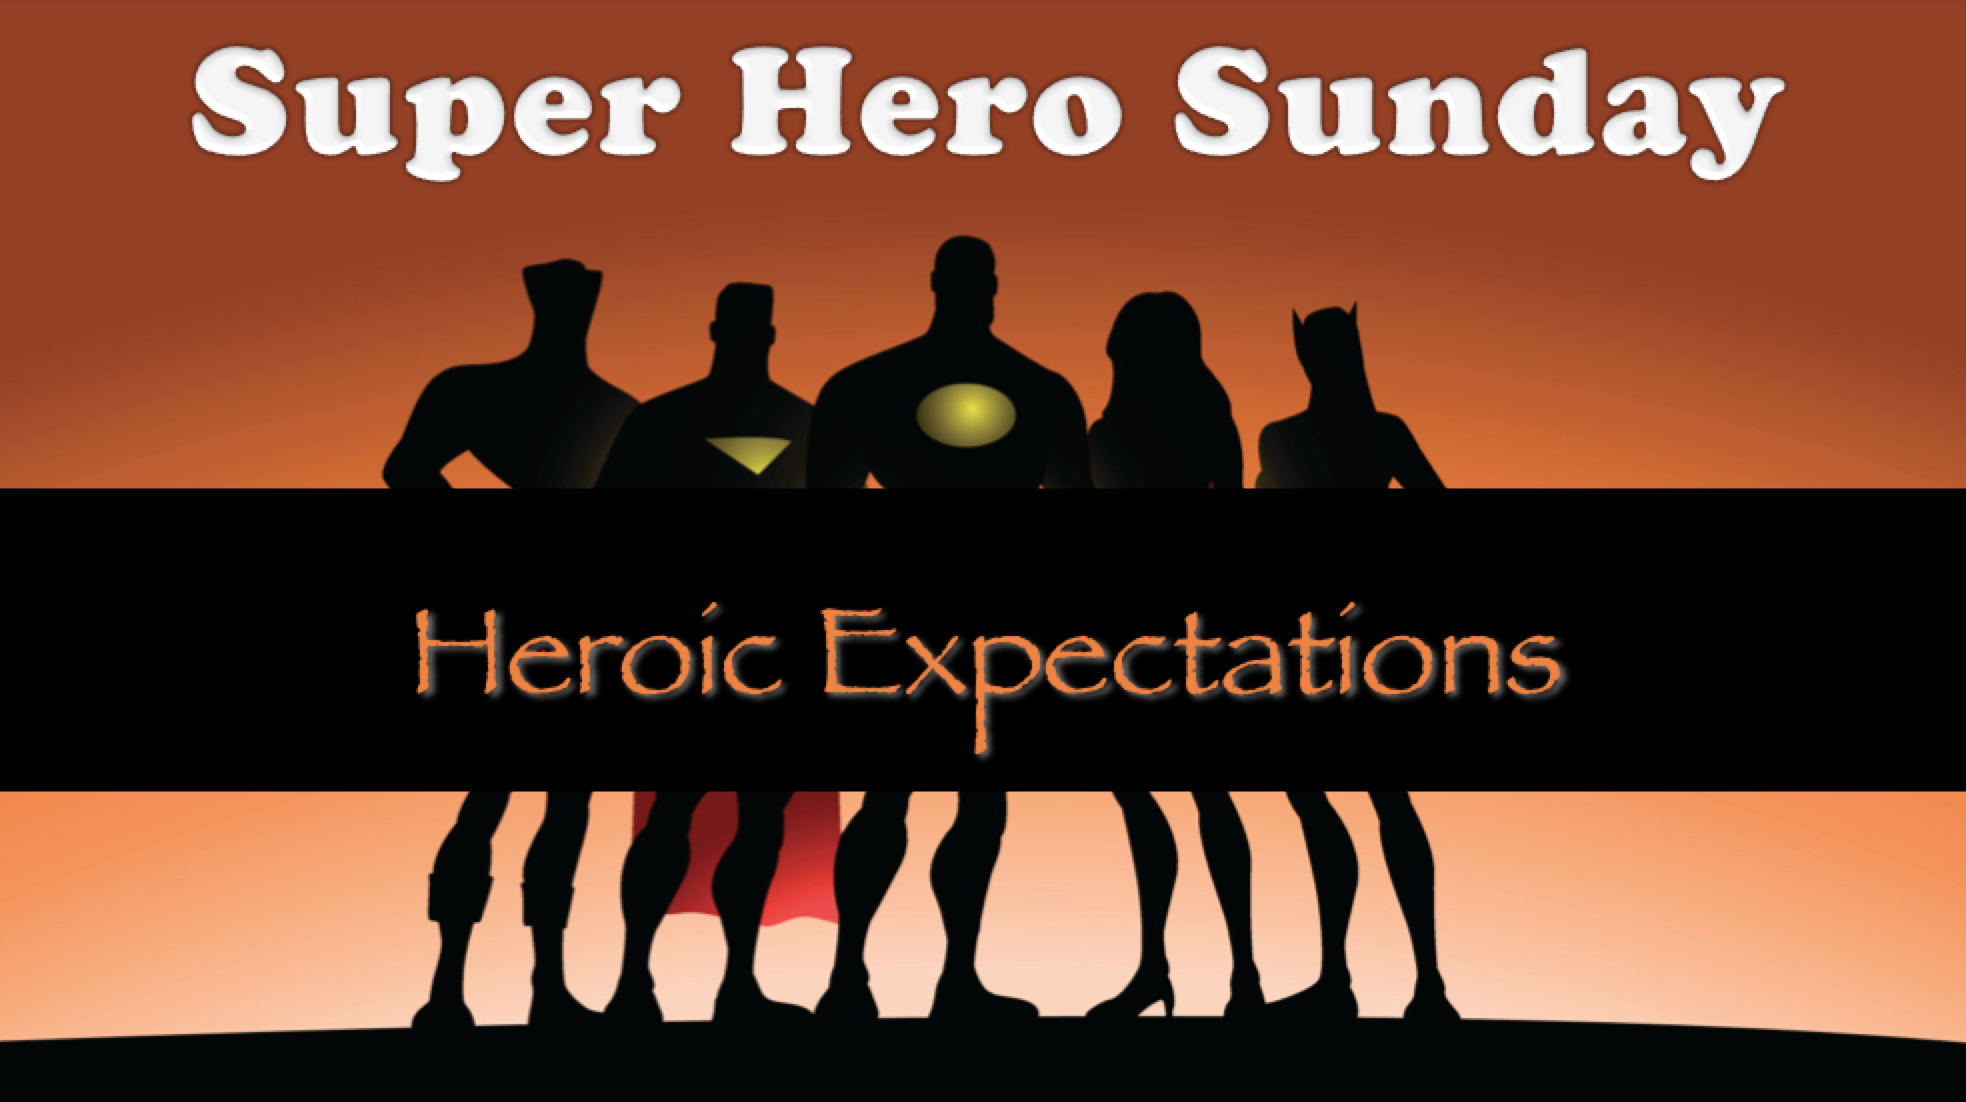 Heroic Expectations - 42m